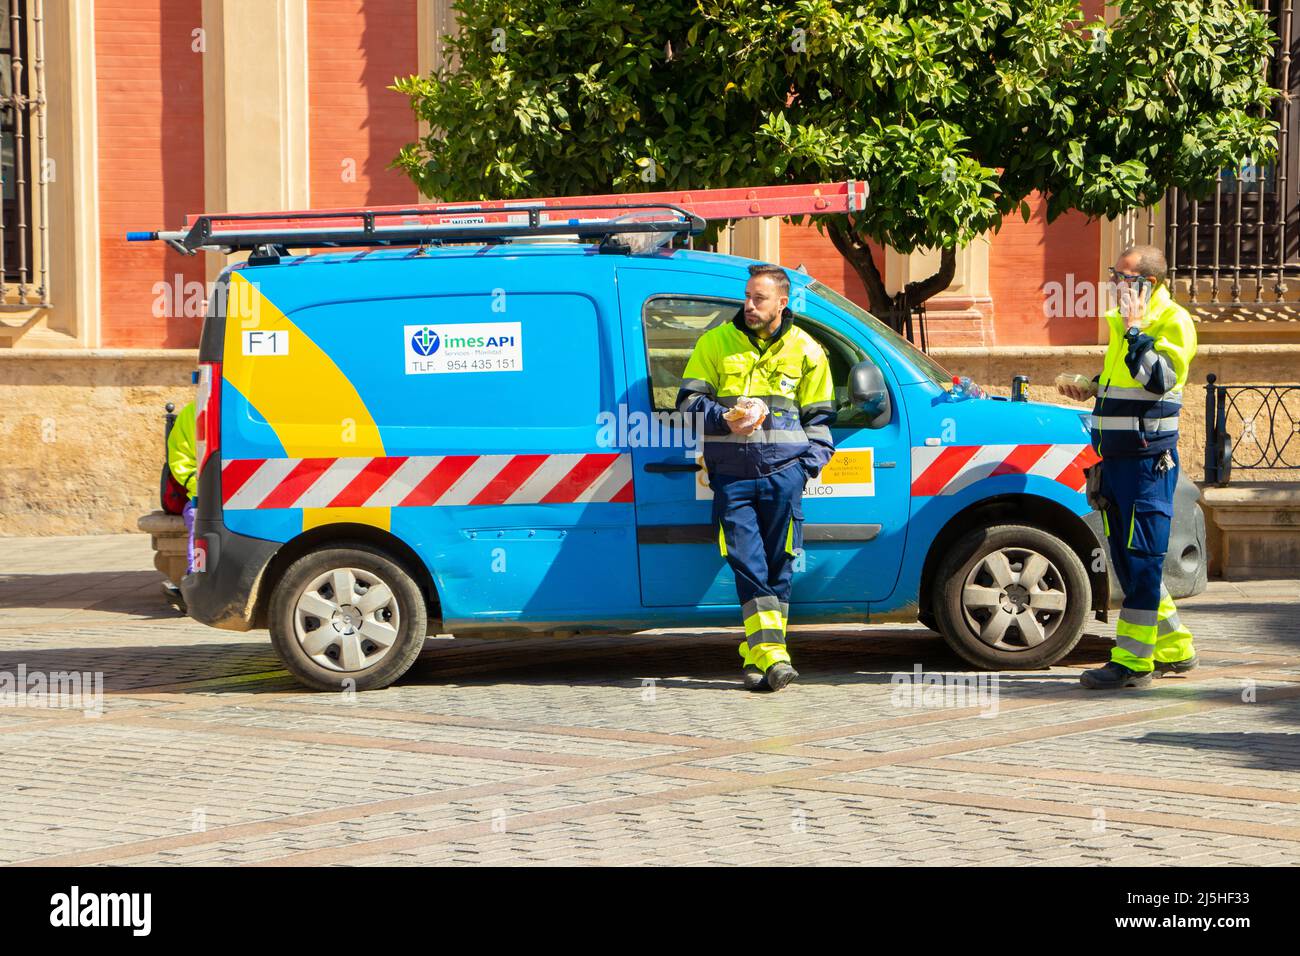 utility workers in hi-vis with imes aPI services and facilities van in Seville Sevilla Spain Stock Photo